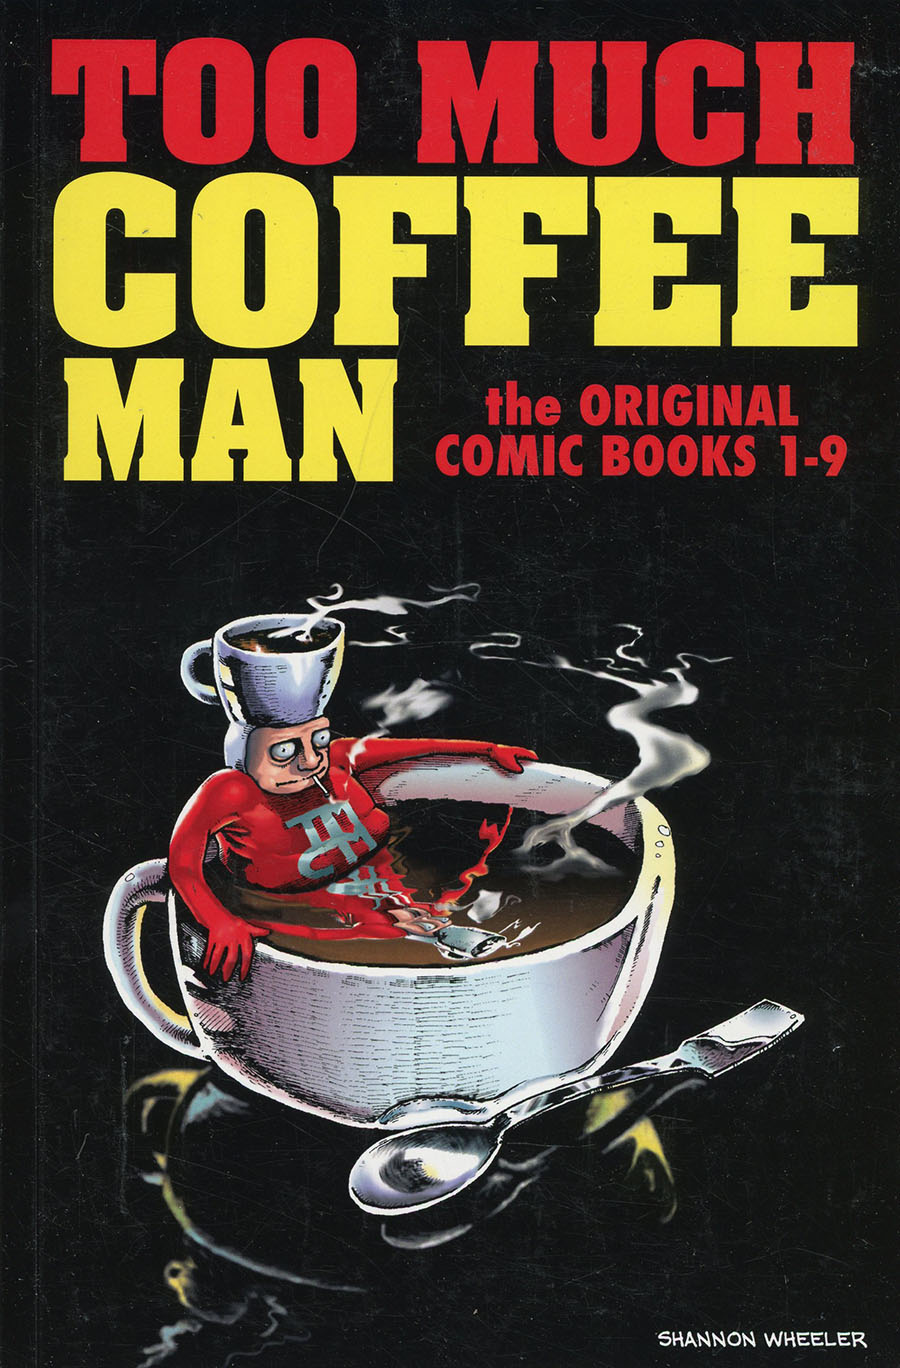 Too Much Coffee Man Original Comic Books 1-9 TP Signed